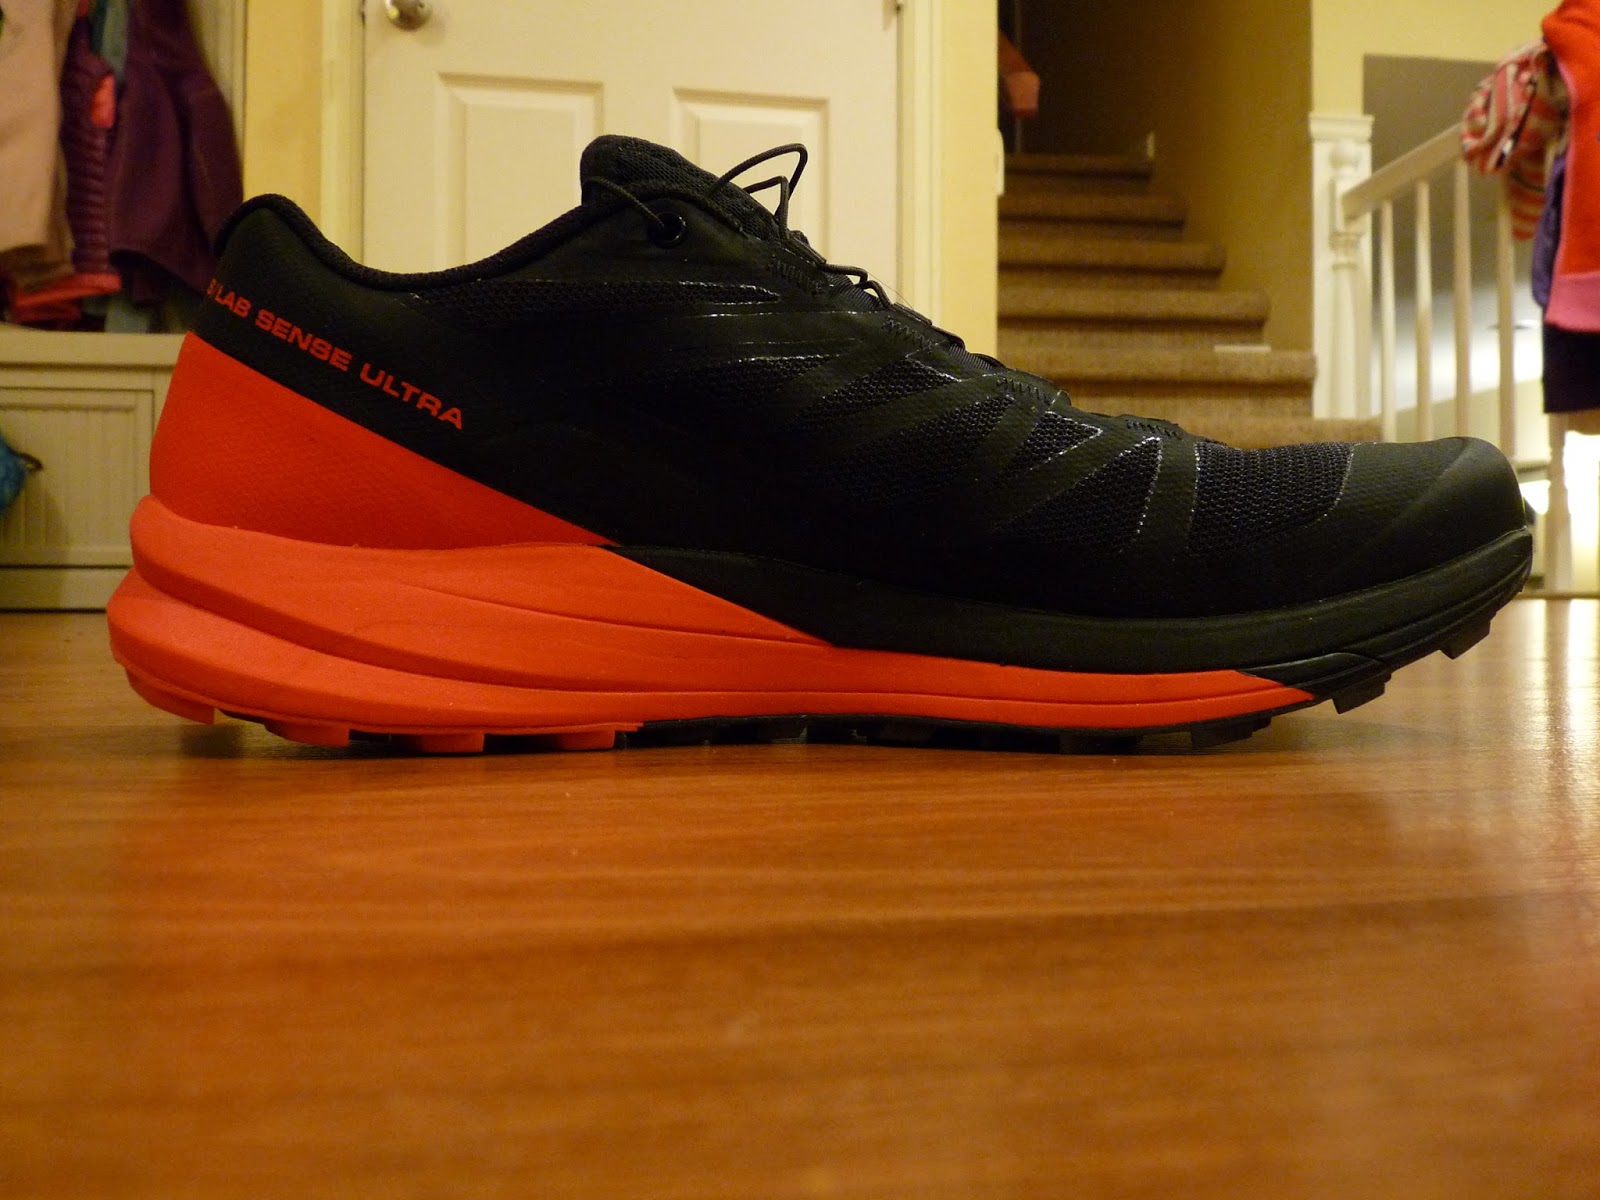 Road Trail Run: S-Lab Sense Ultra Review - S-Lab Race Performance Now Comes With Ample Cushion